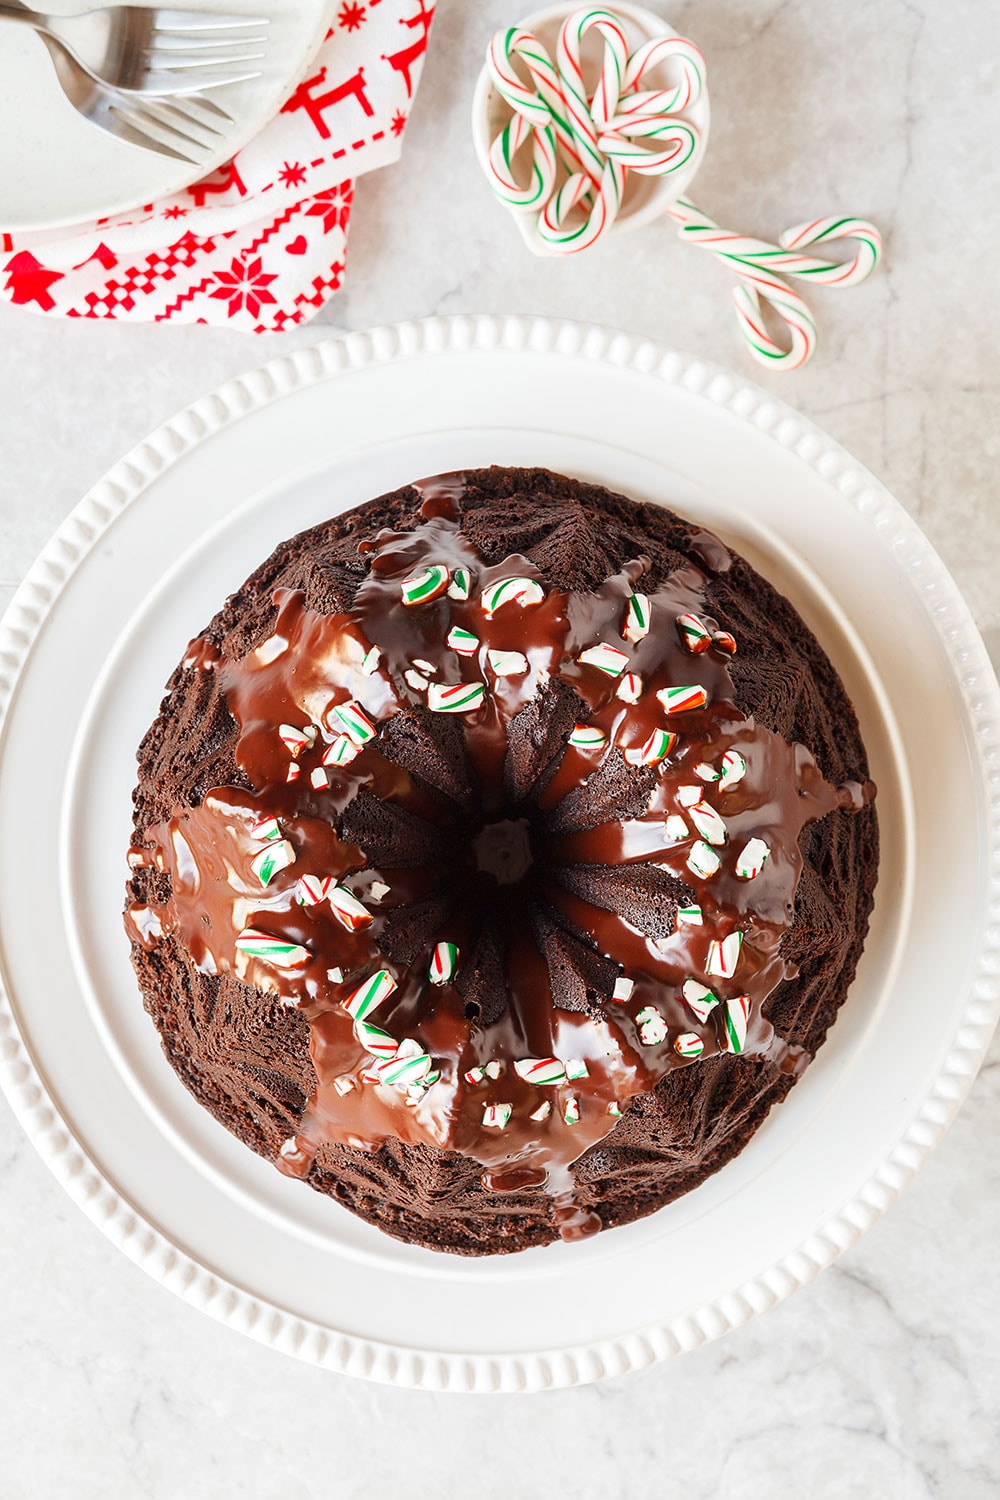 Peppermint Mocha Bundt Cake is the absolute PERFECT holiday cake! It's as easy as it is beautiful and loaded with chocolate, coffee, and peppermint flavors.